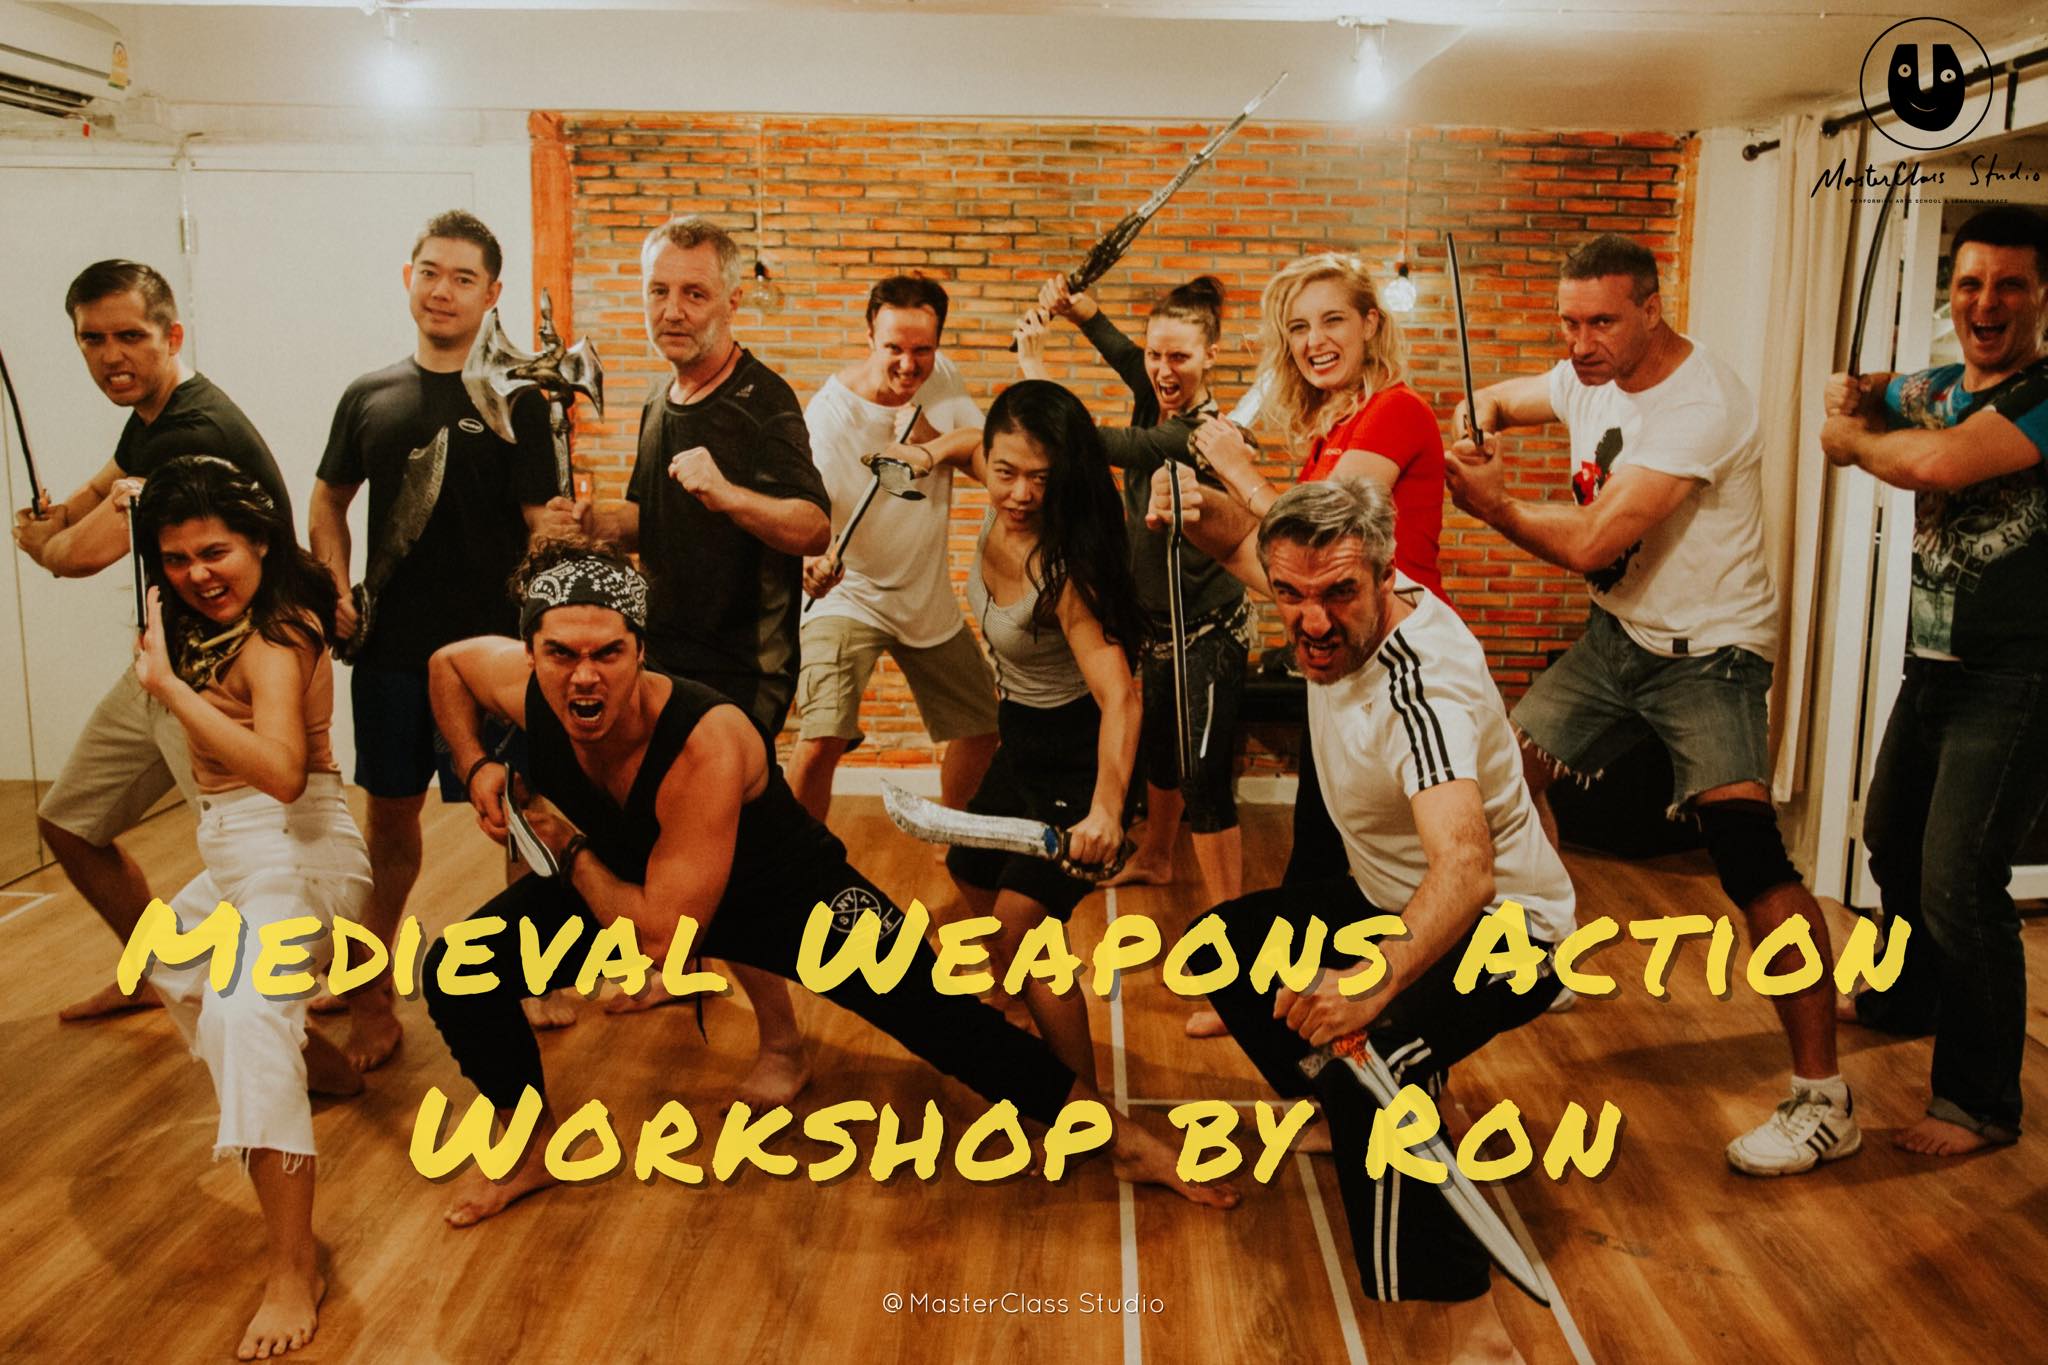 Amazing pictures from Ron’s Medieval Weapons Action Workshop! Great energy in the room. All students were able to get in…